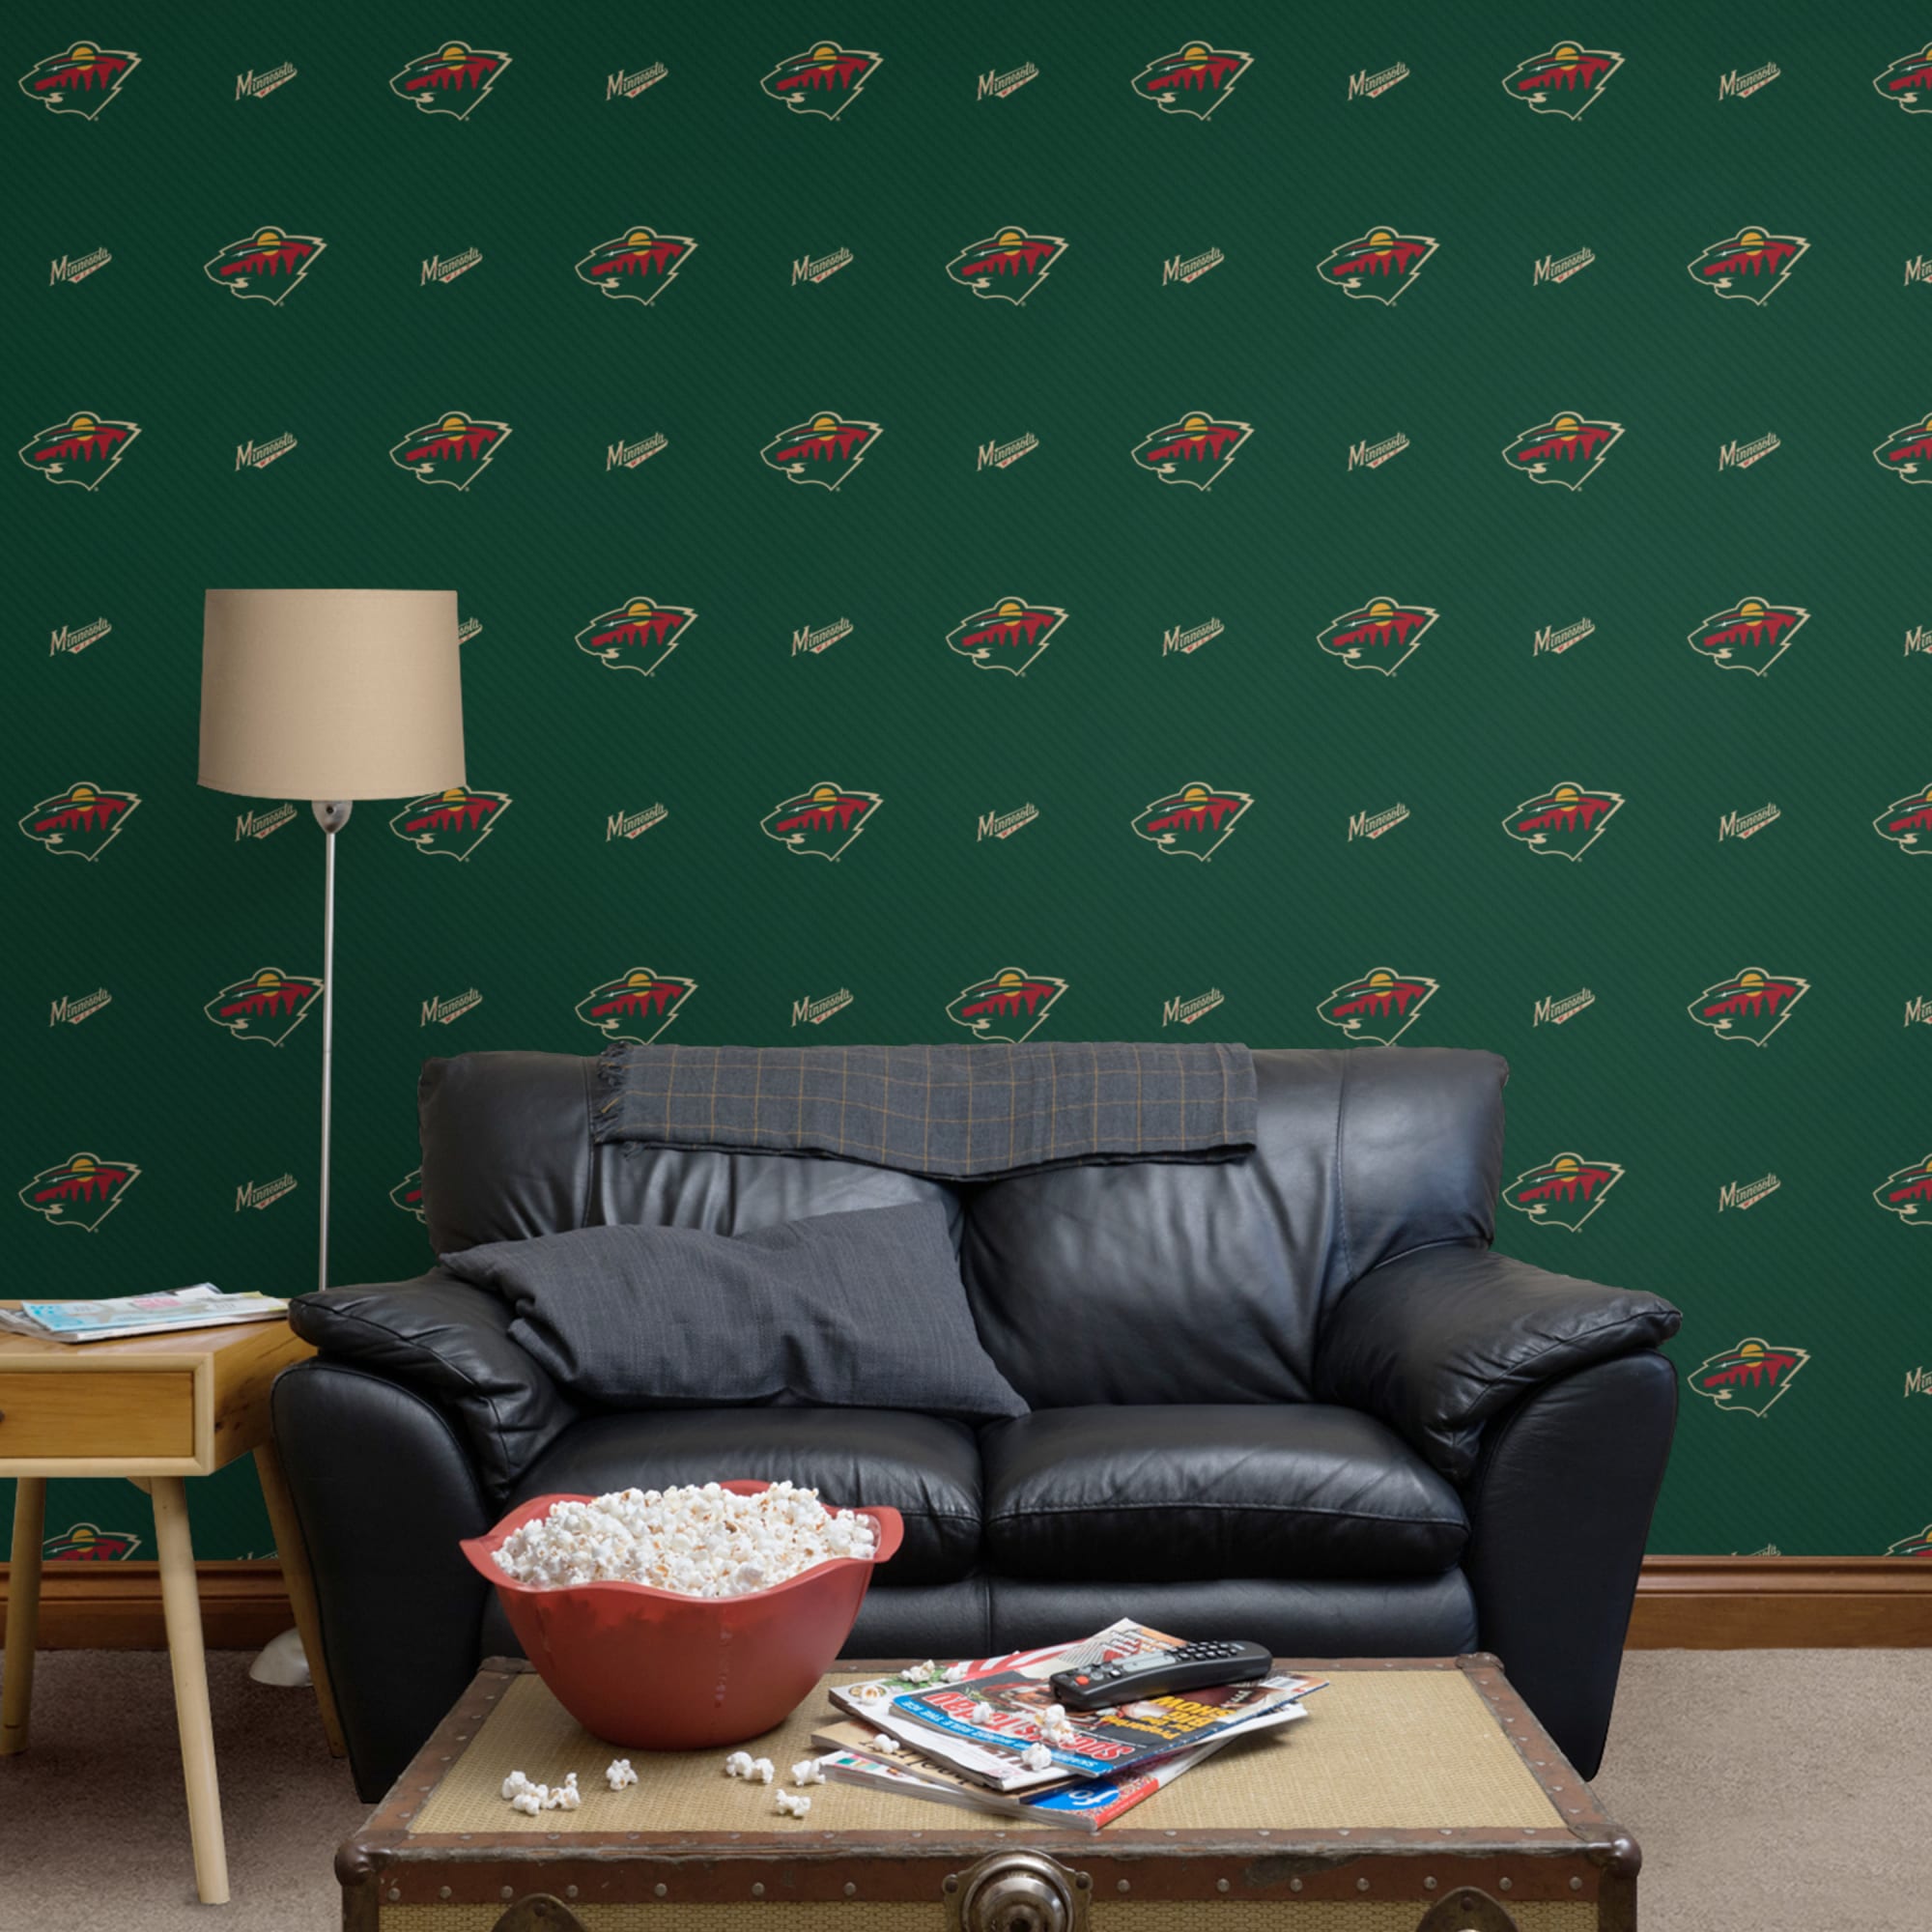 Minnesota Wild: Stripes Pattern - Officially Licensed NHL Removable Wallpaper 12" x 12" Sample by Fathead | 100% Vinyl